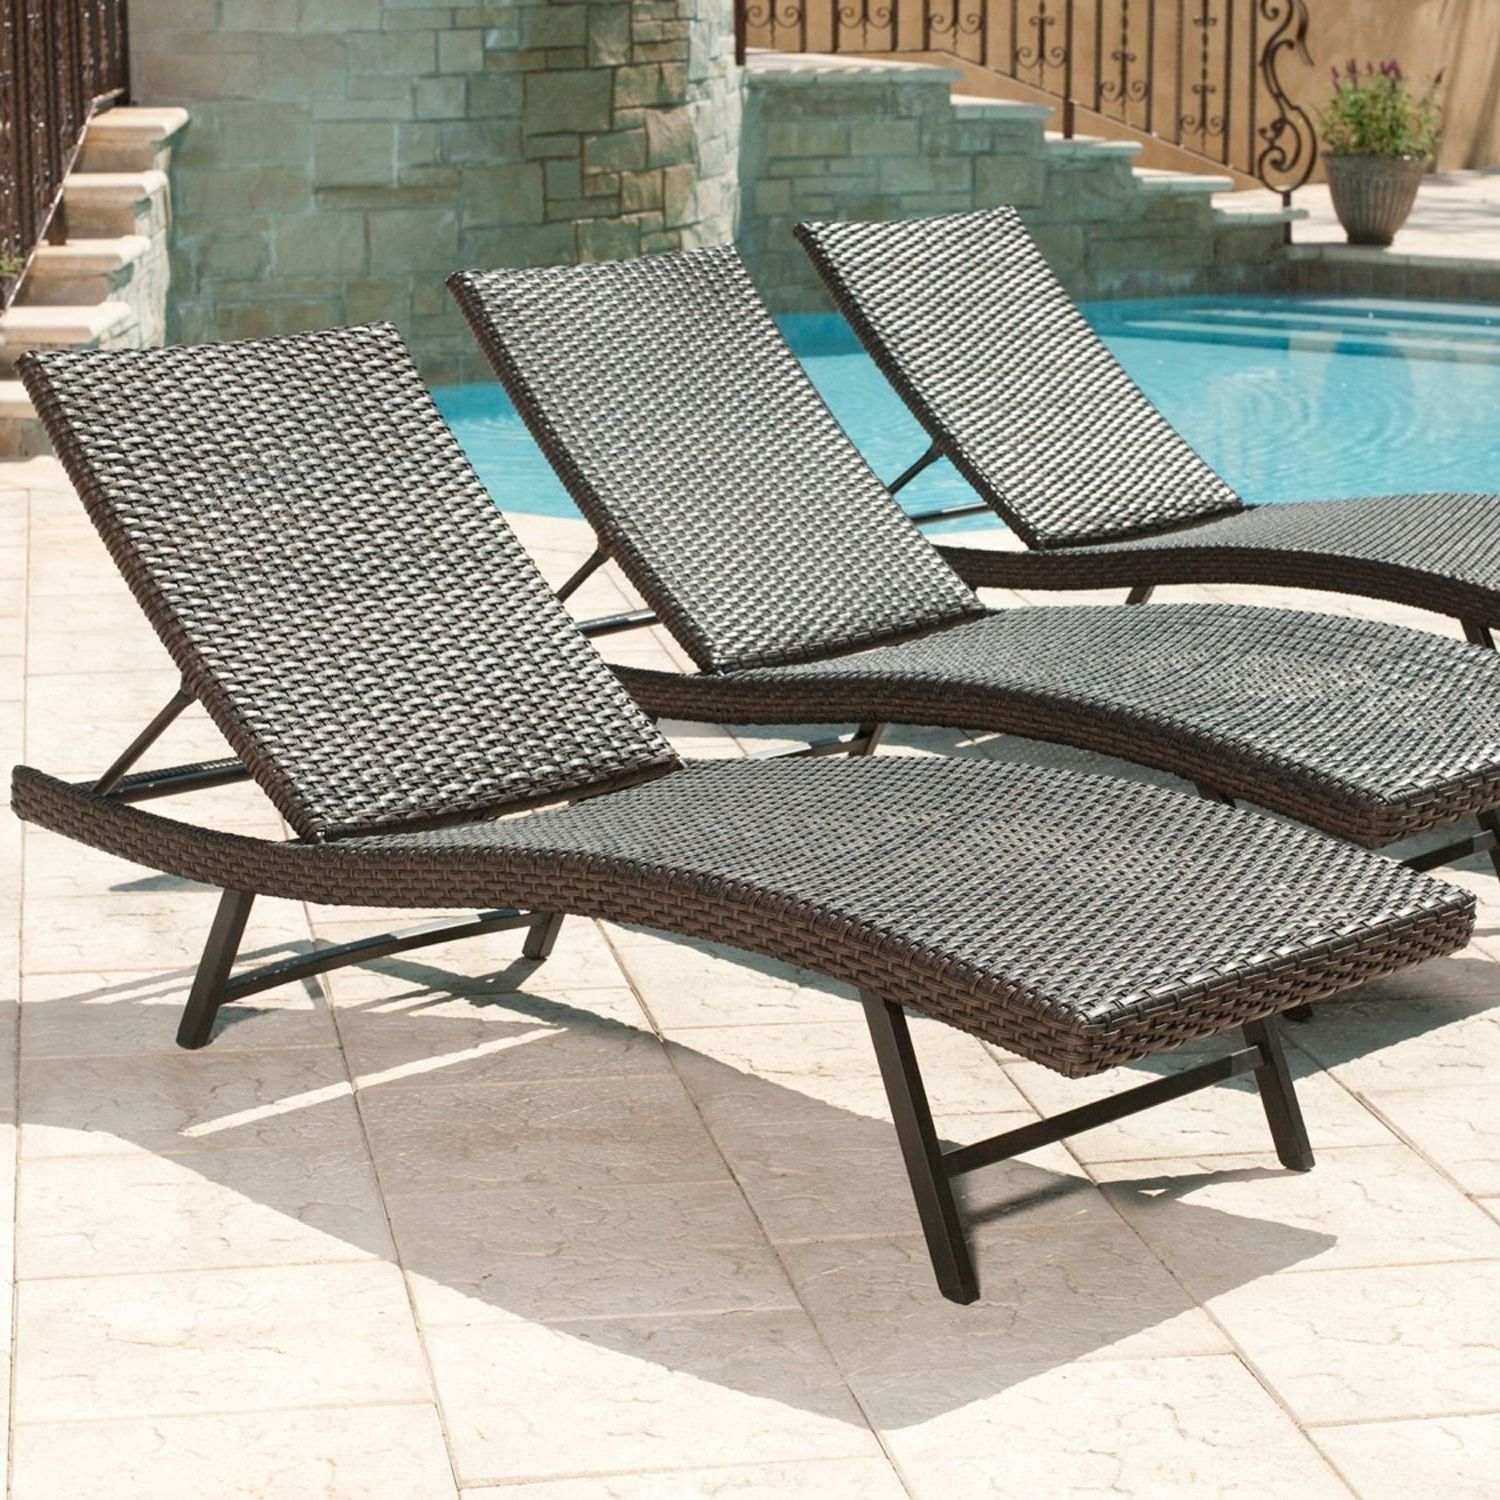 Sam's Club Chaise Lounge Chairs Inside Popular Amazon: Member's Mark« Heritage Chaise Lounge Chair: Garden (View 3 of 15)